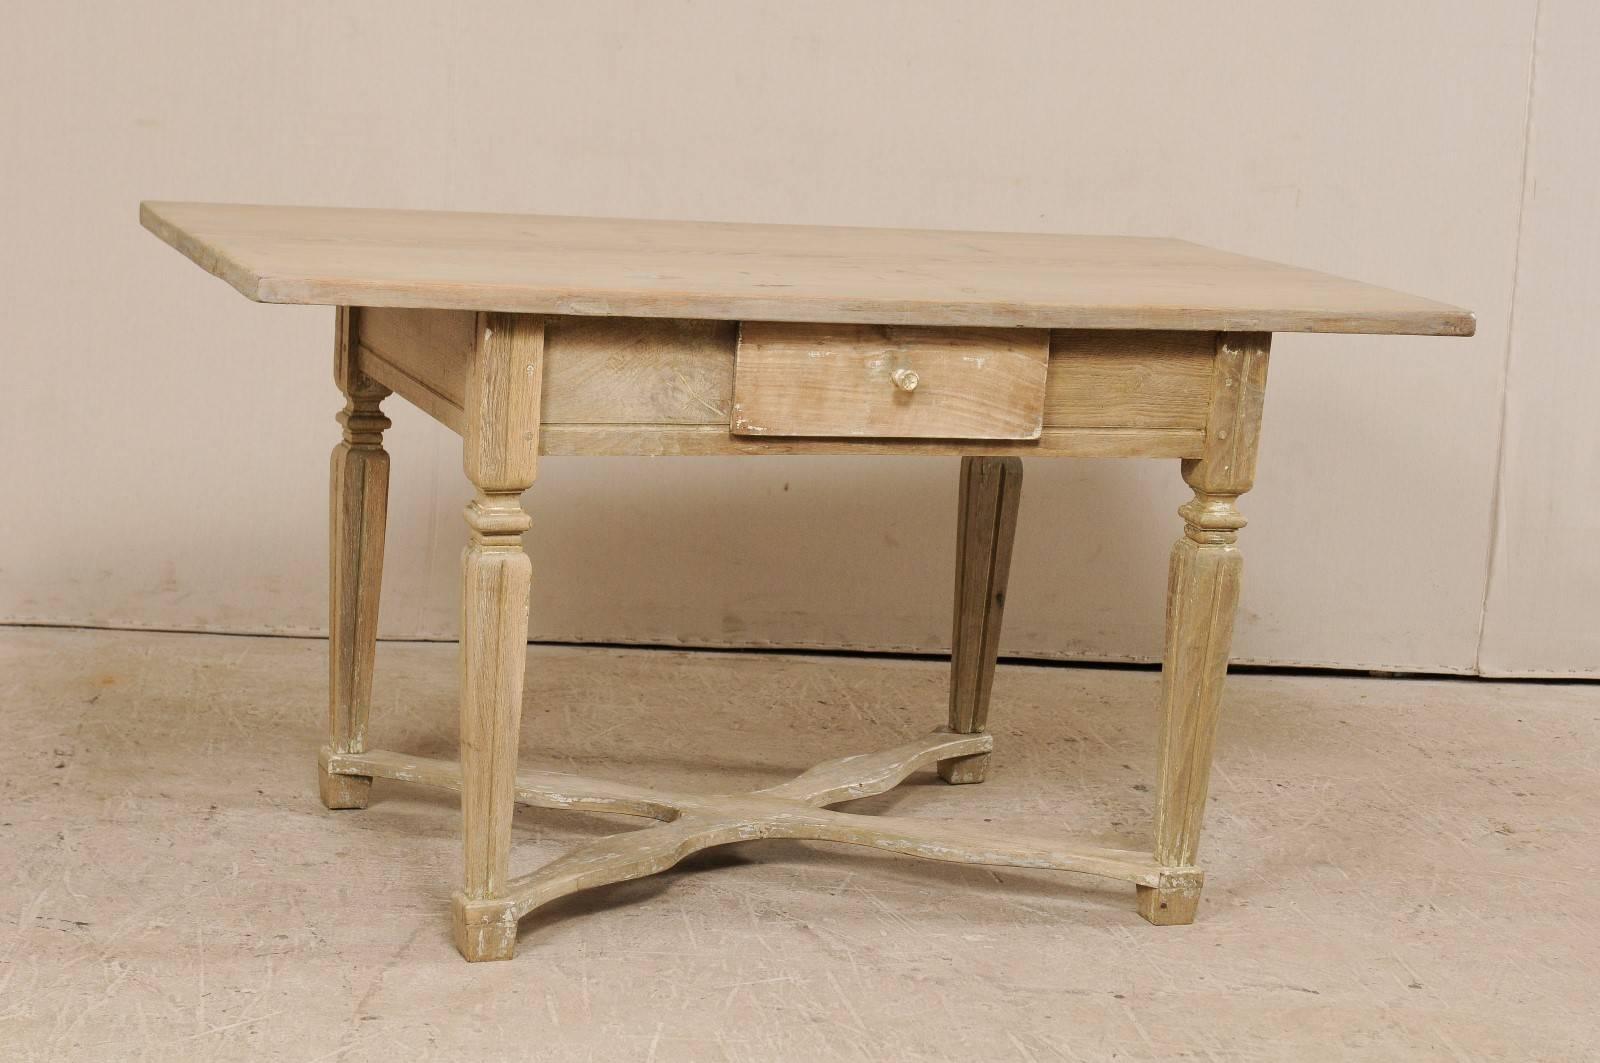 A Swedish 19th century Baroque style desk or table with single drawer. This antique Swedish desk features a rectangular-shaped top, a clean apron with single drawer, and carved fluted legs which are supported with a centre cross stretcher, and